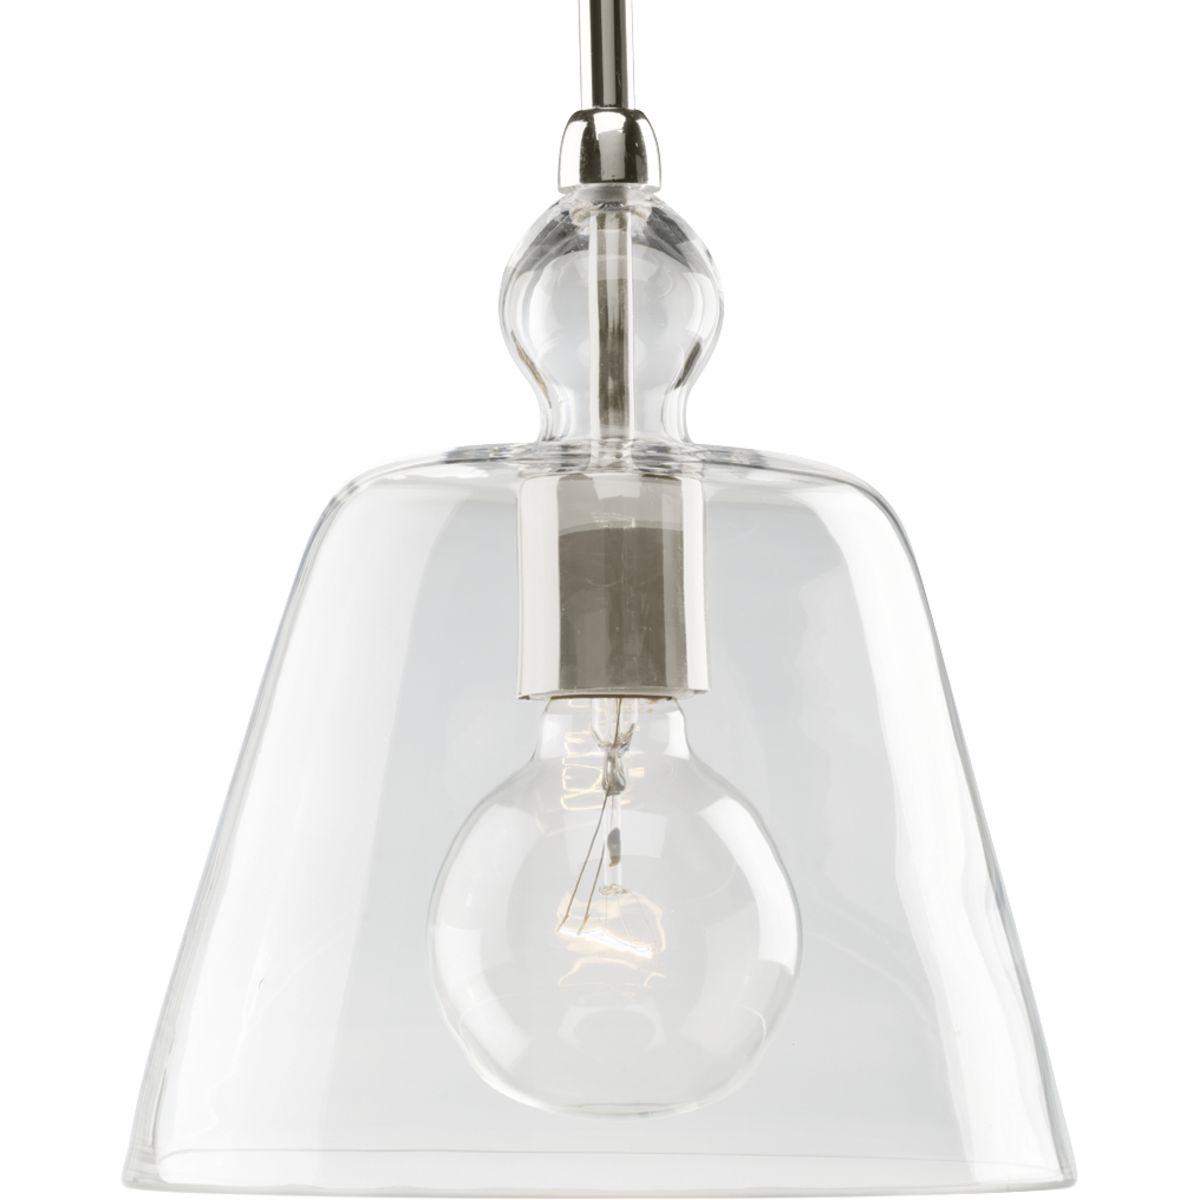 Hubbell P5184-104 One-light stem hung mini-pendant with hand-blown clear glass and a hint of polished nickel peering through.  ; Polished Nickel finish. ; Hand-blown clear glass. ; Includes two 6", one 12", one 15" stems and of chain.